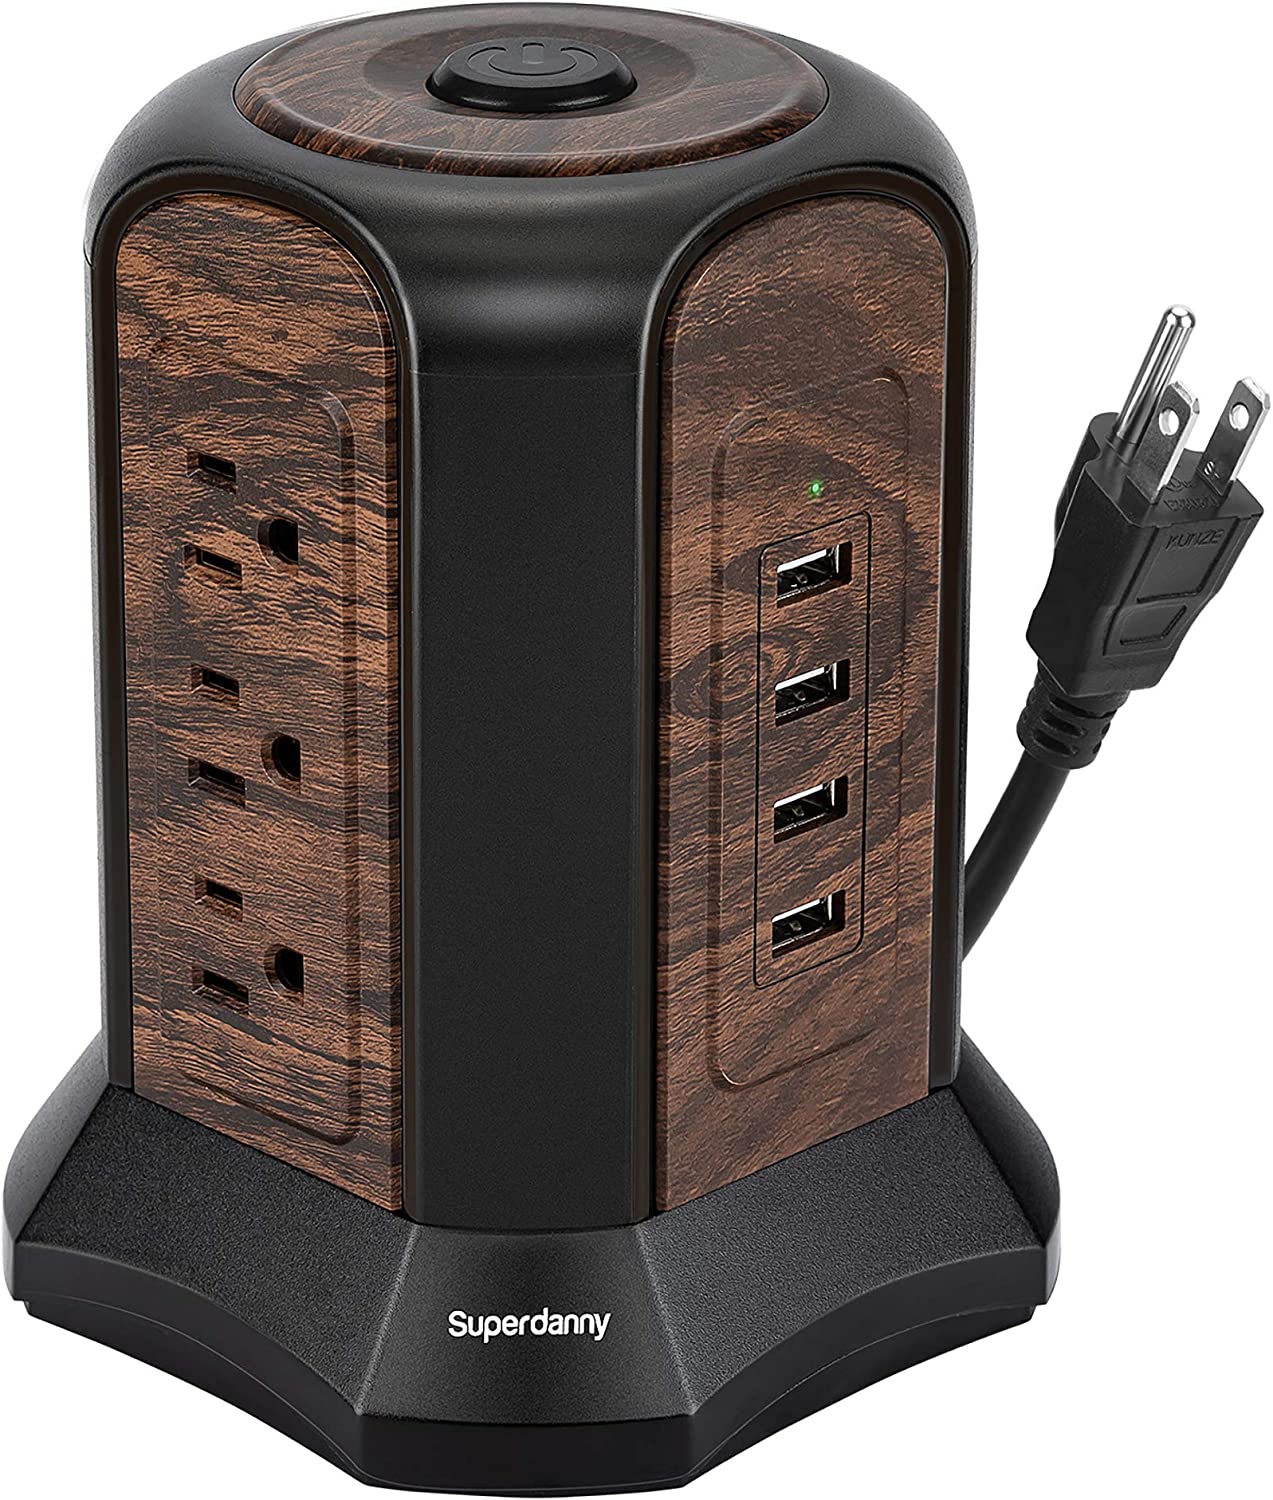 10ft Power Strip Tower Surge Protector 10A 9 Outlet 4 USB SUPERDANNY